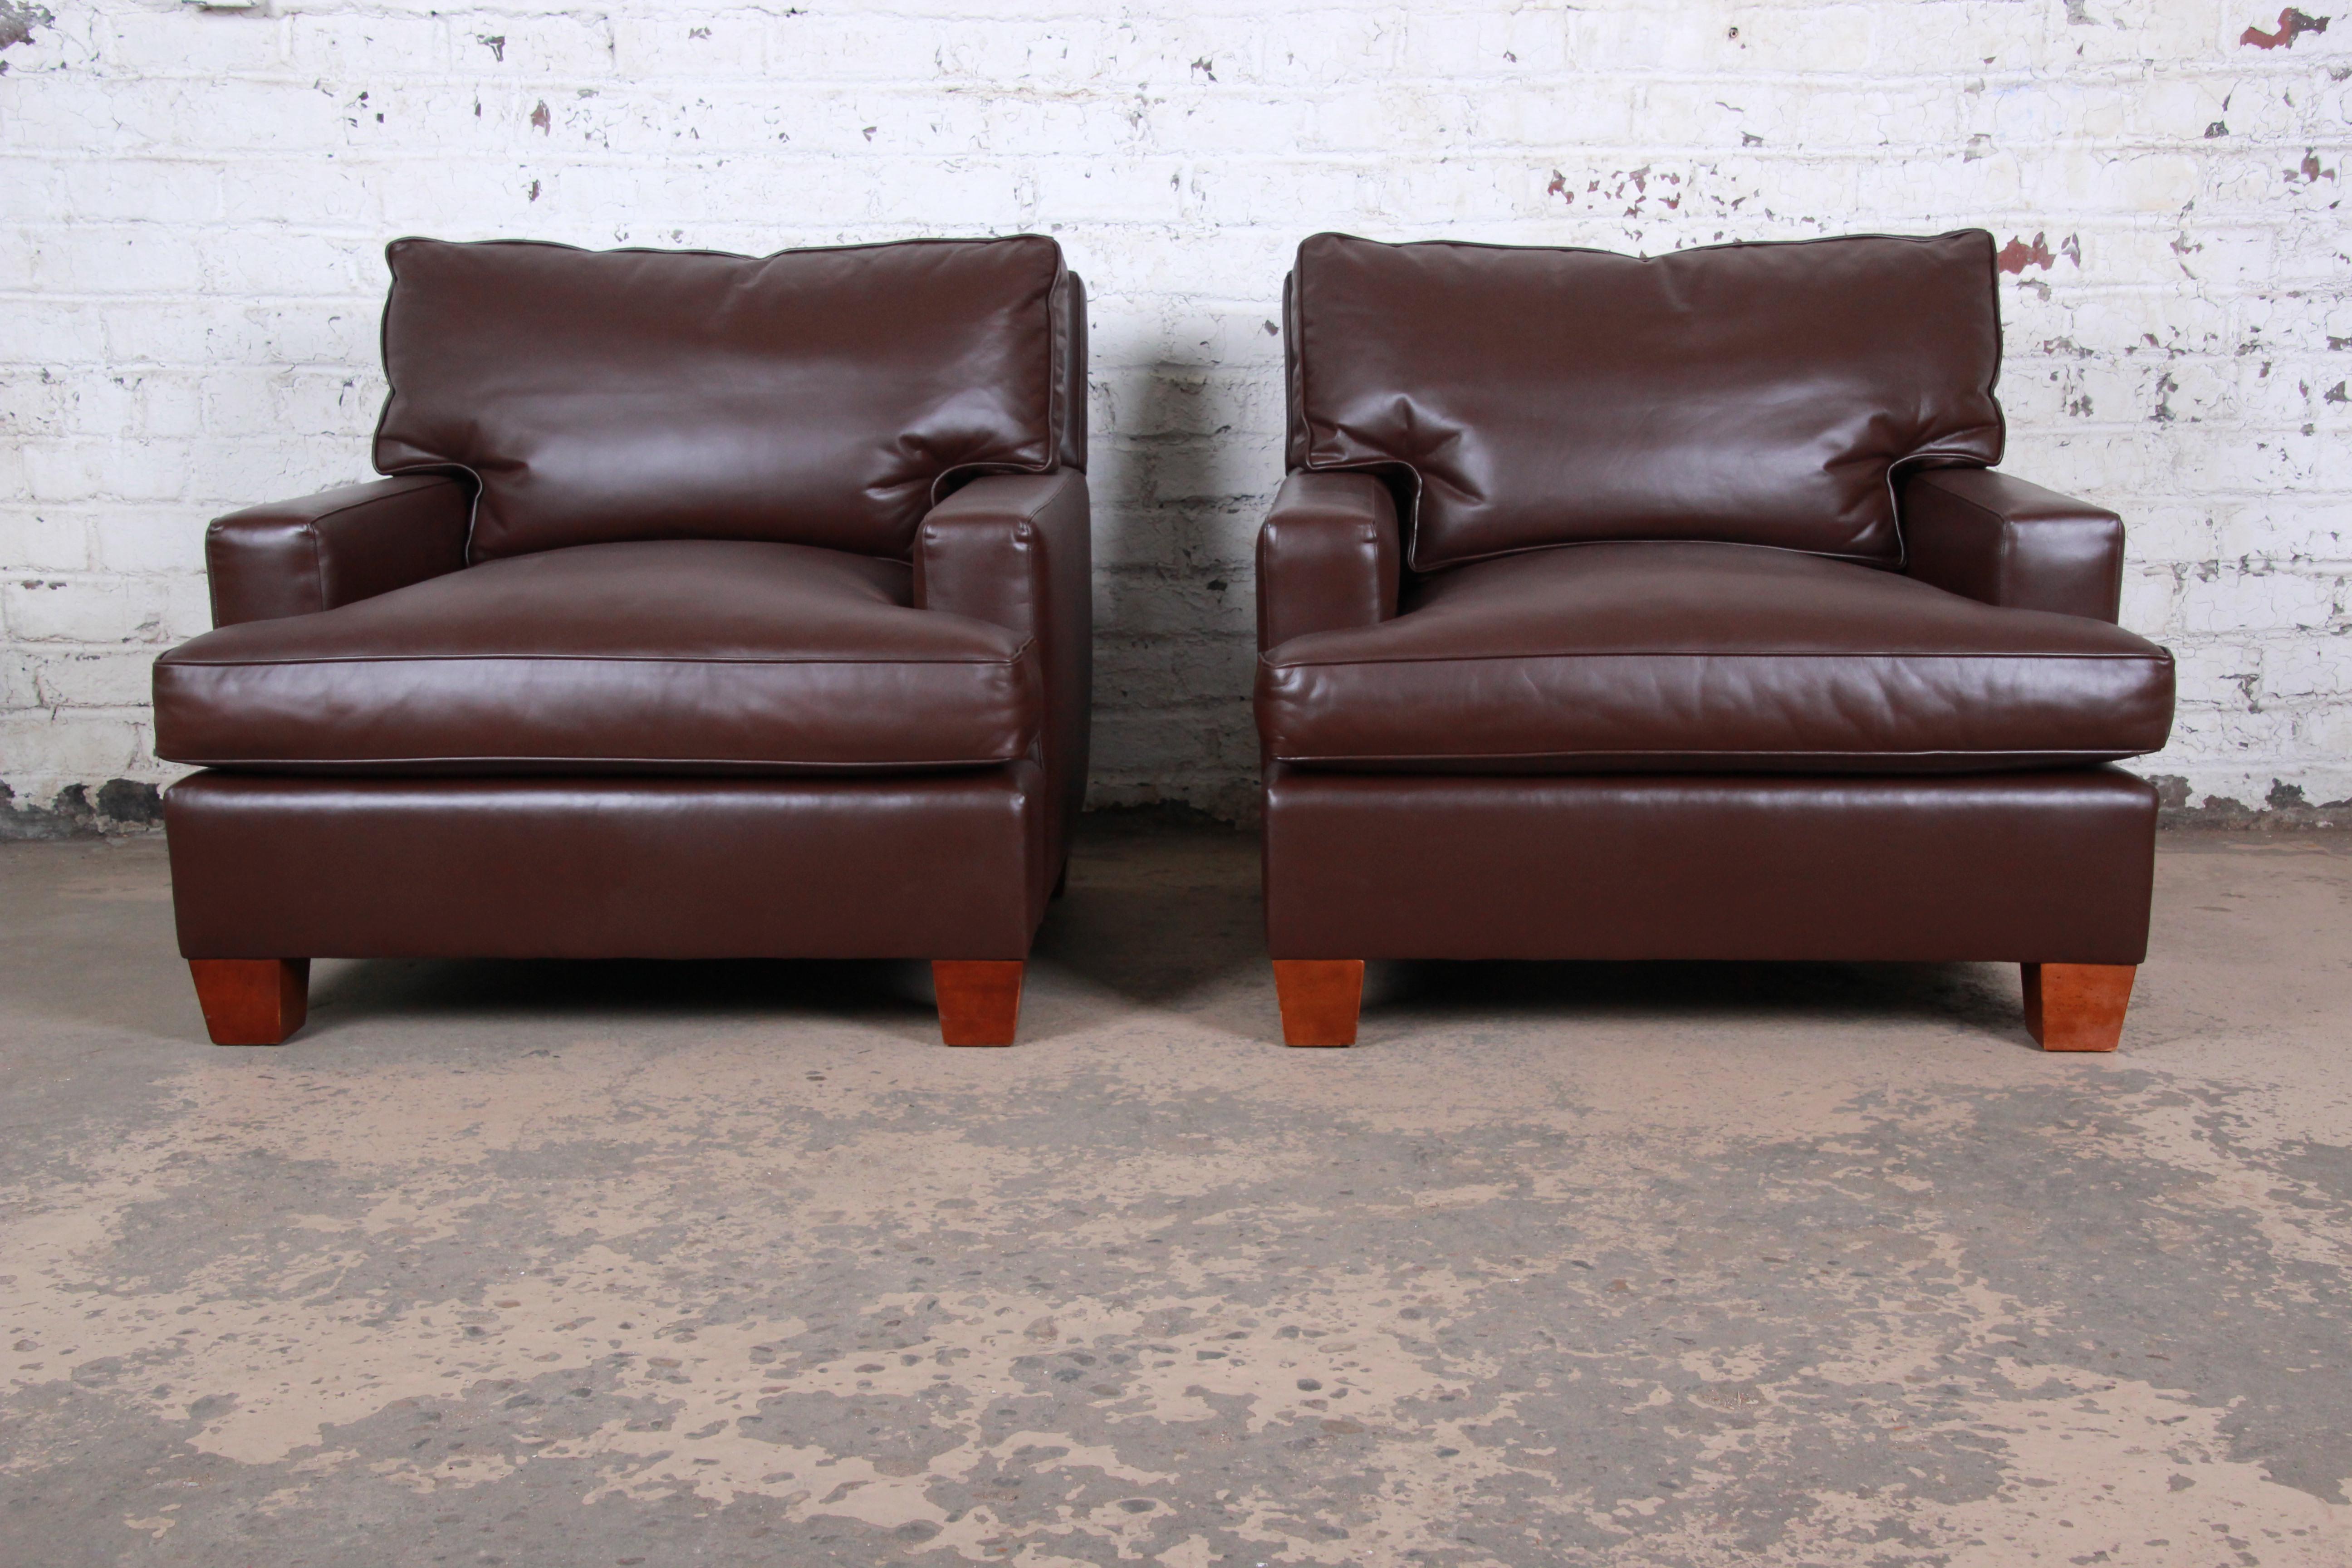 A gorgeous pair of modern brown leather club chairs by Baker Furniture. The chairs feature supple high grade dark brown leather with clean lines and a nice contemporary design. The leather has been fully restored and is in pristine condition. The